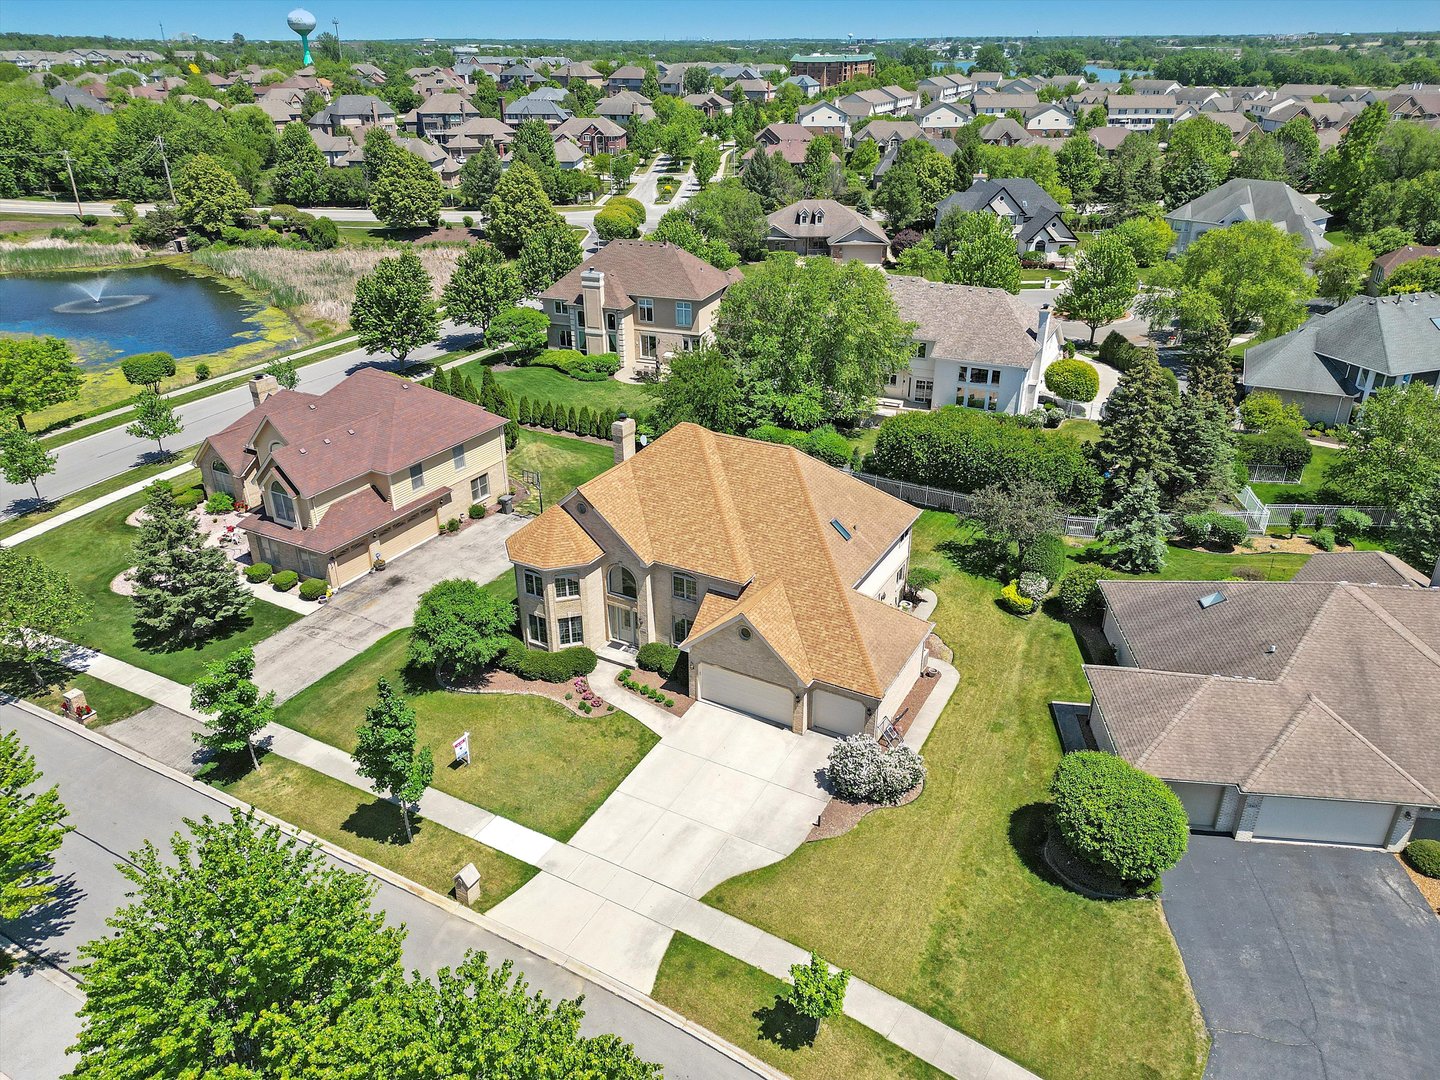 an aerial view of residential houses with outdoor space and street view